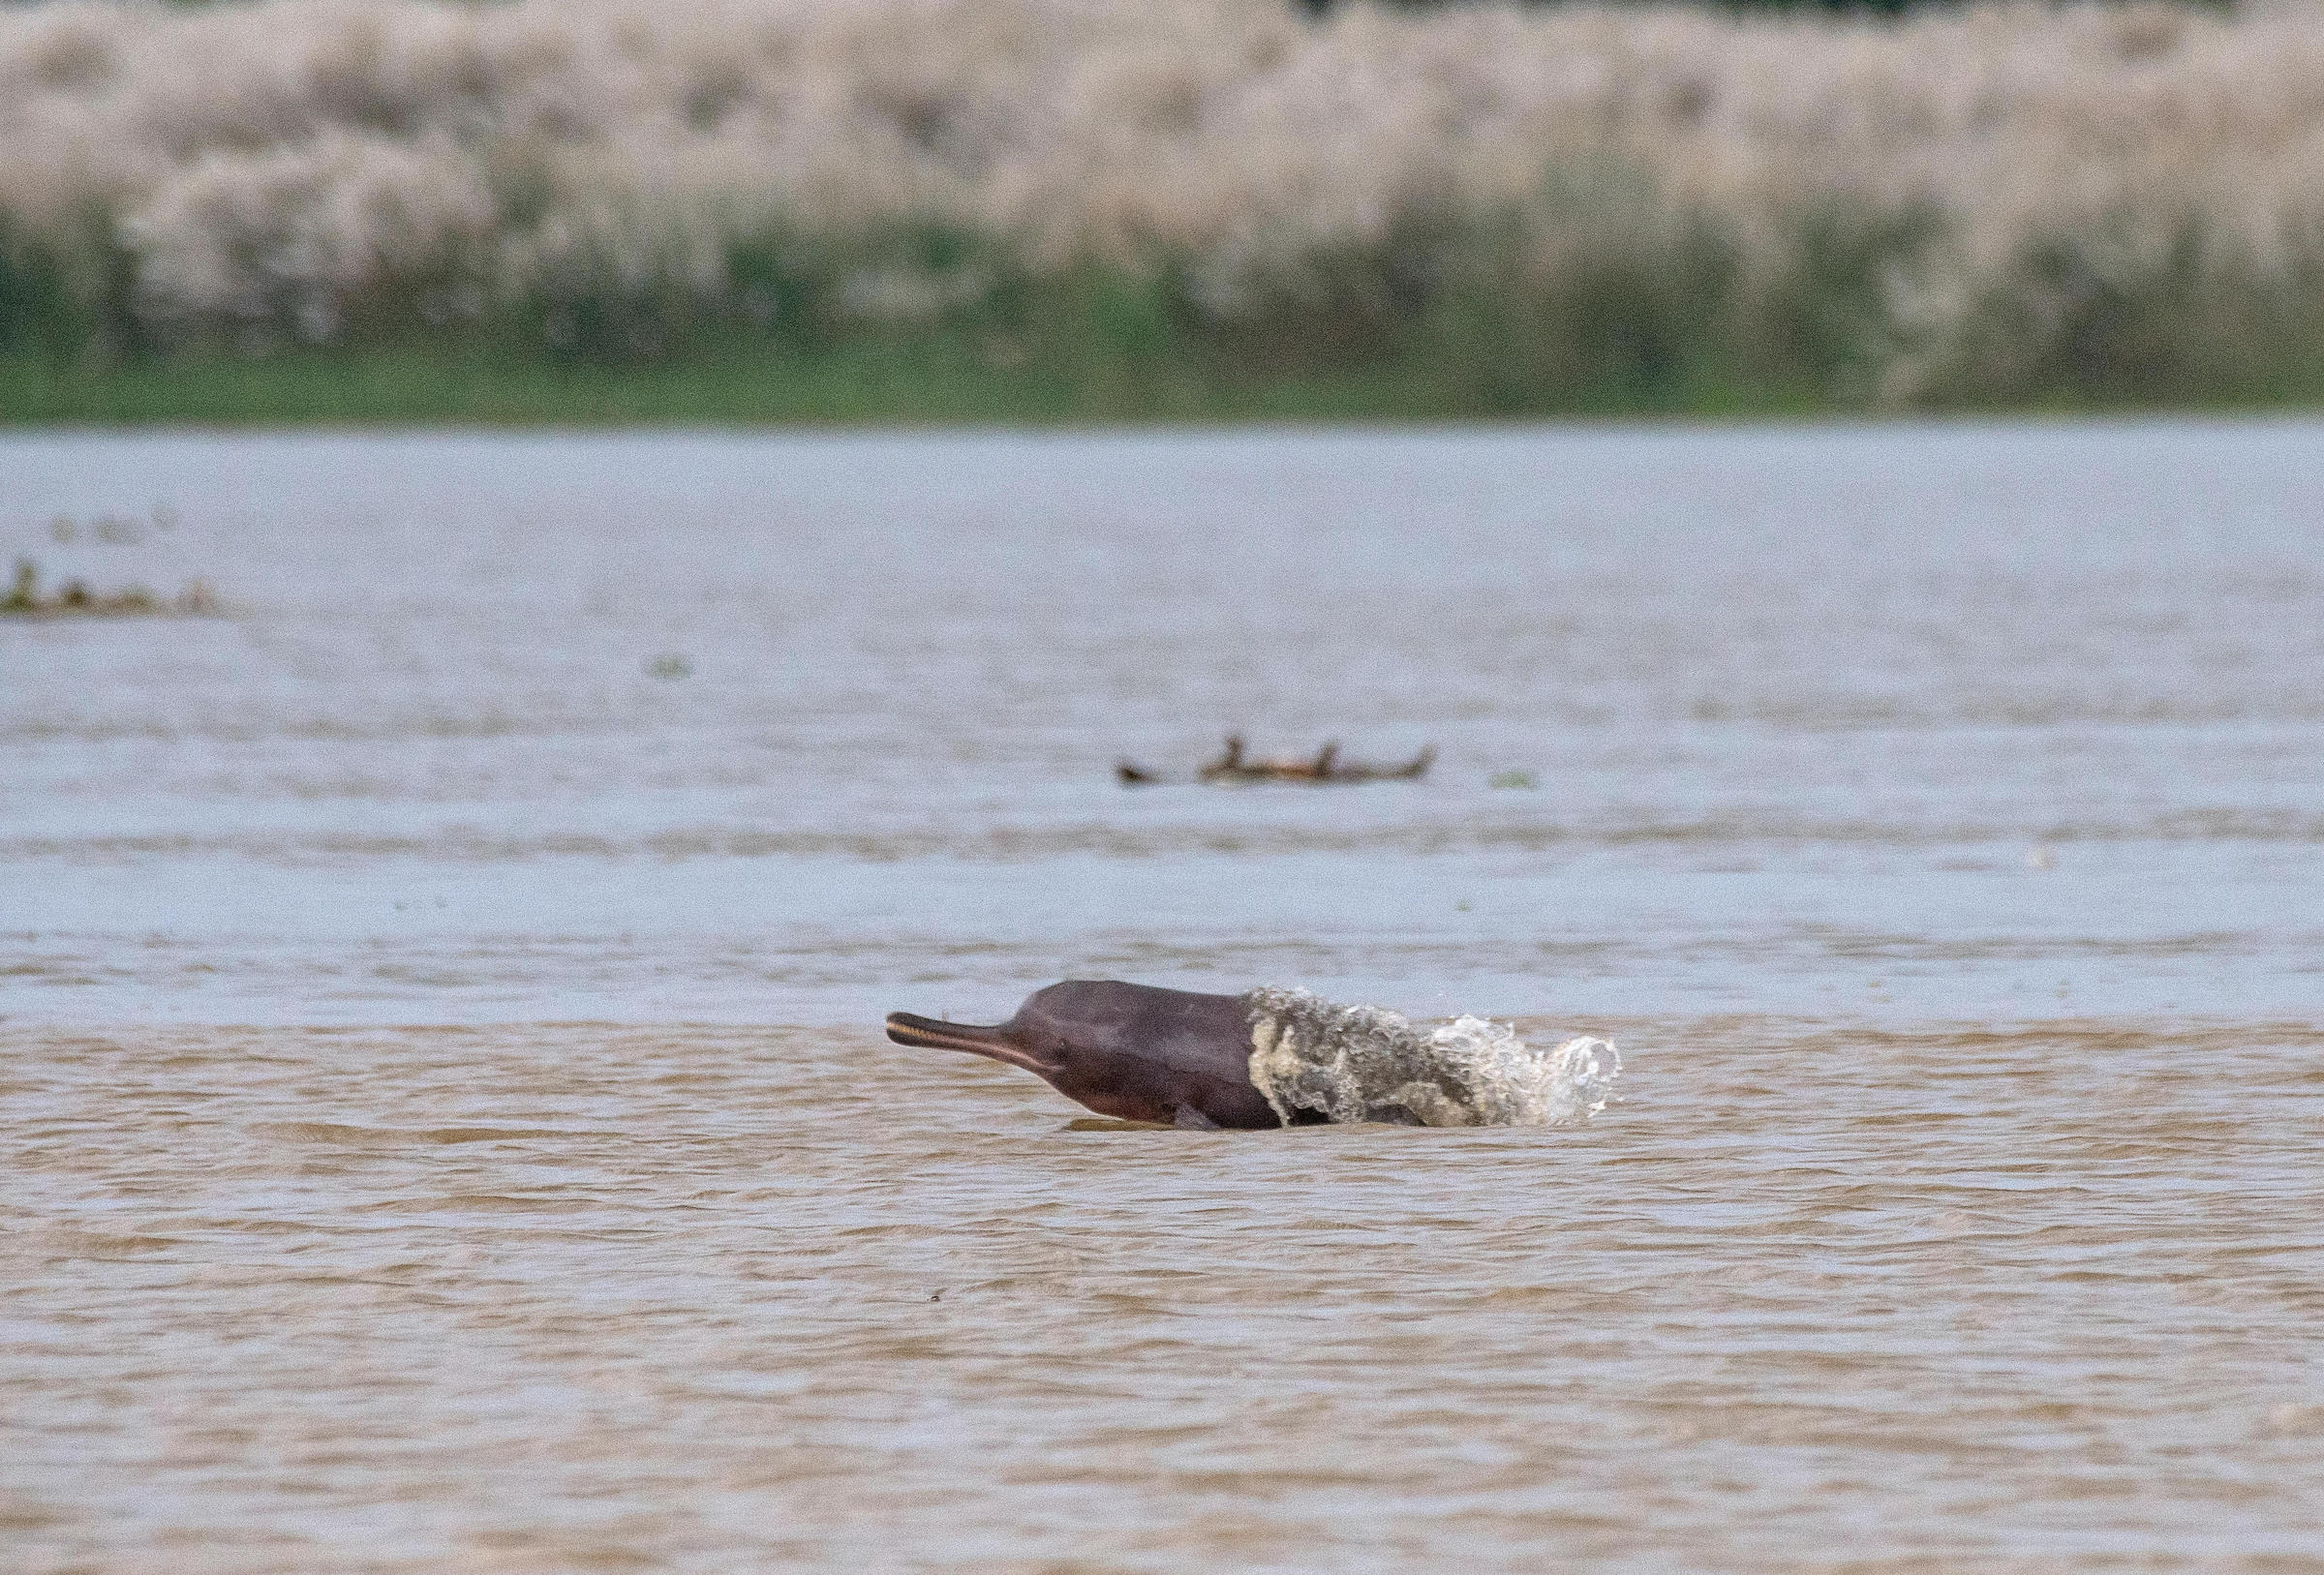 Ganga river dolphin in India faces extinction | China Dialogue